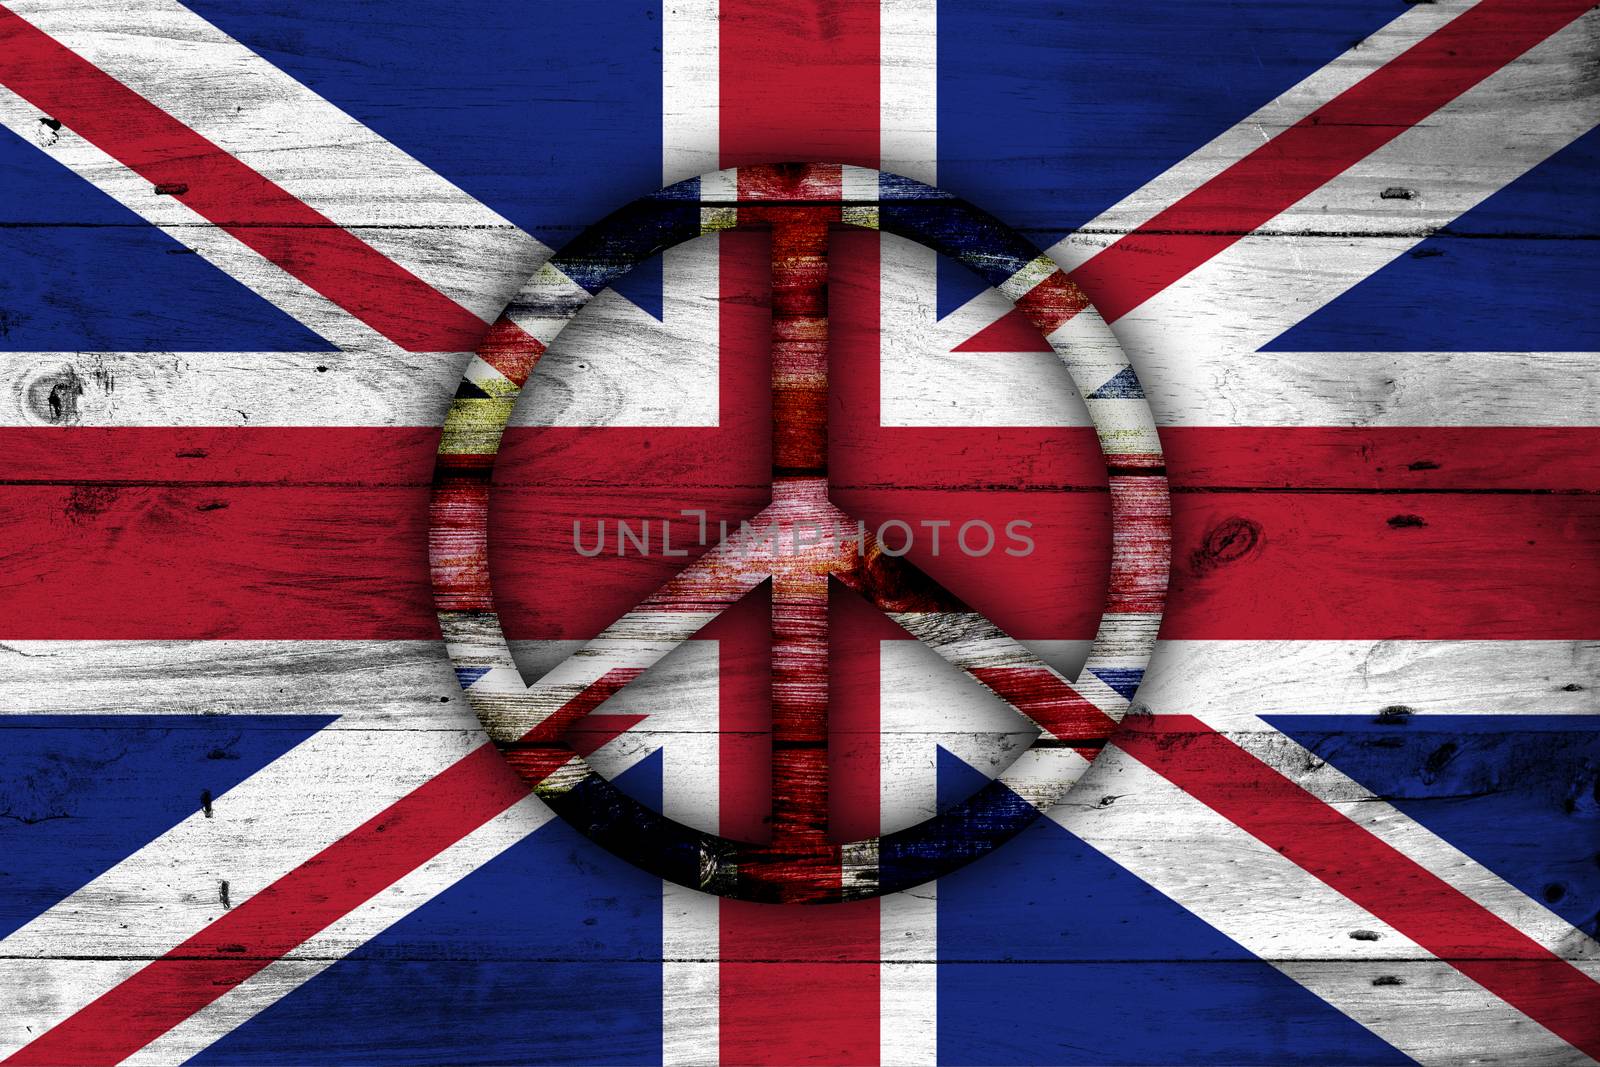 Abstract British flag image with a peace sign.